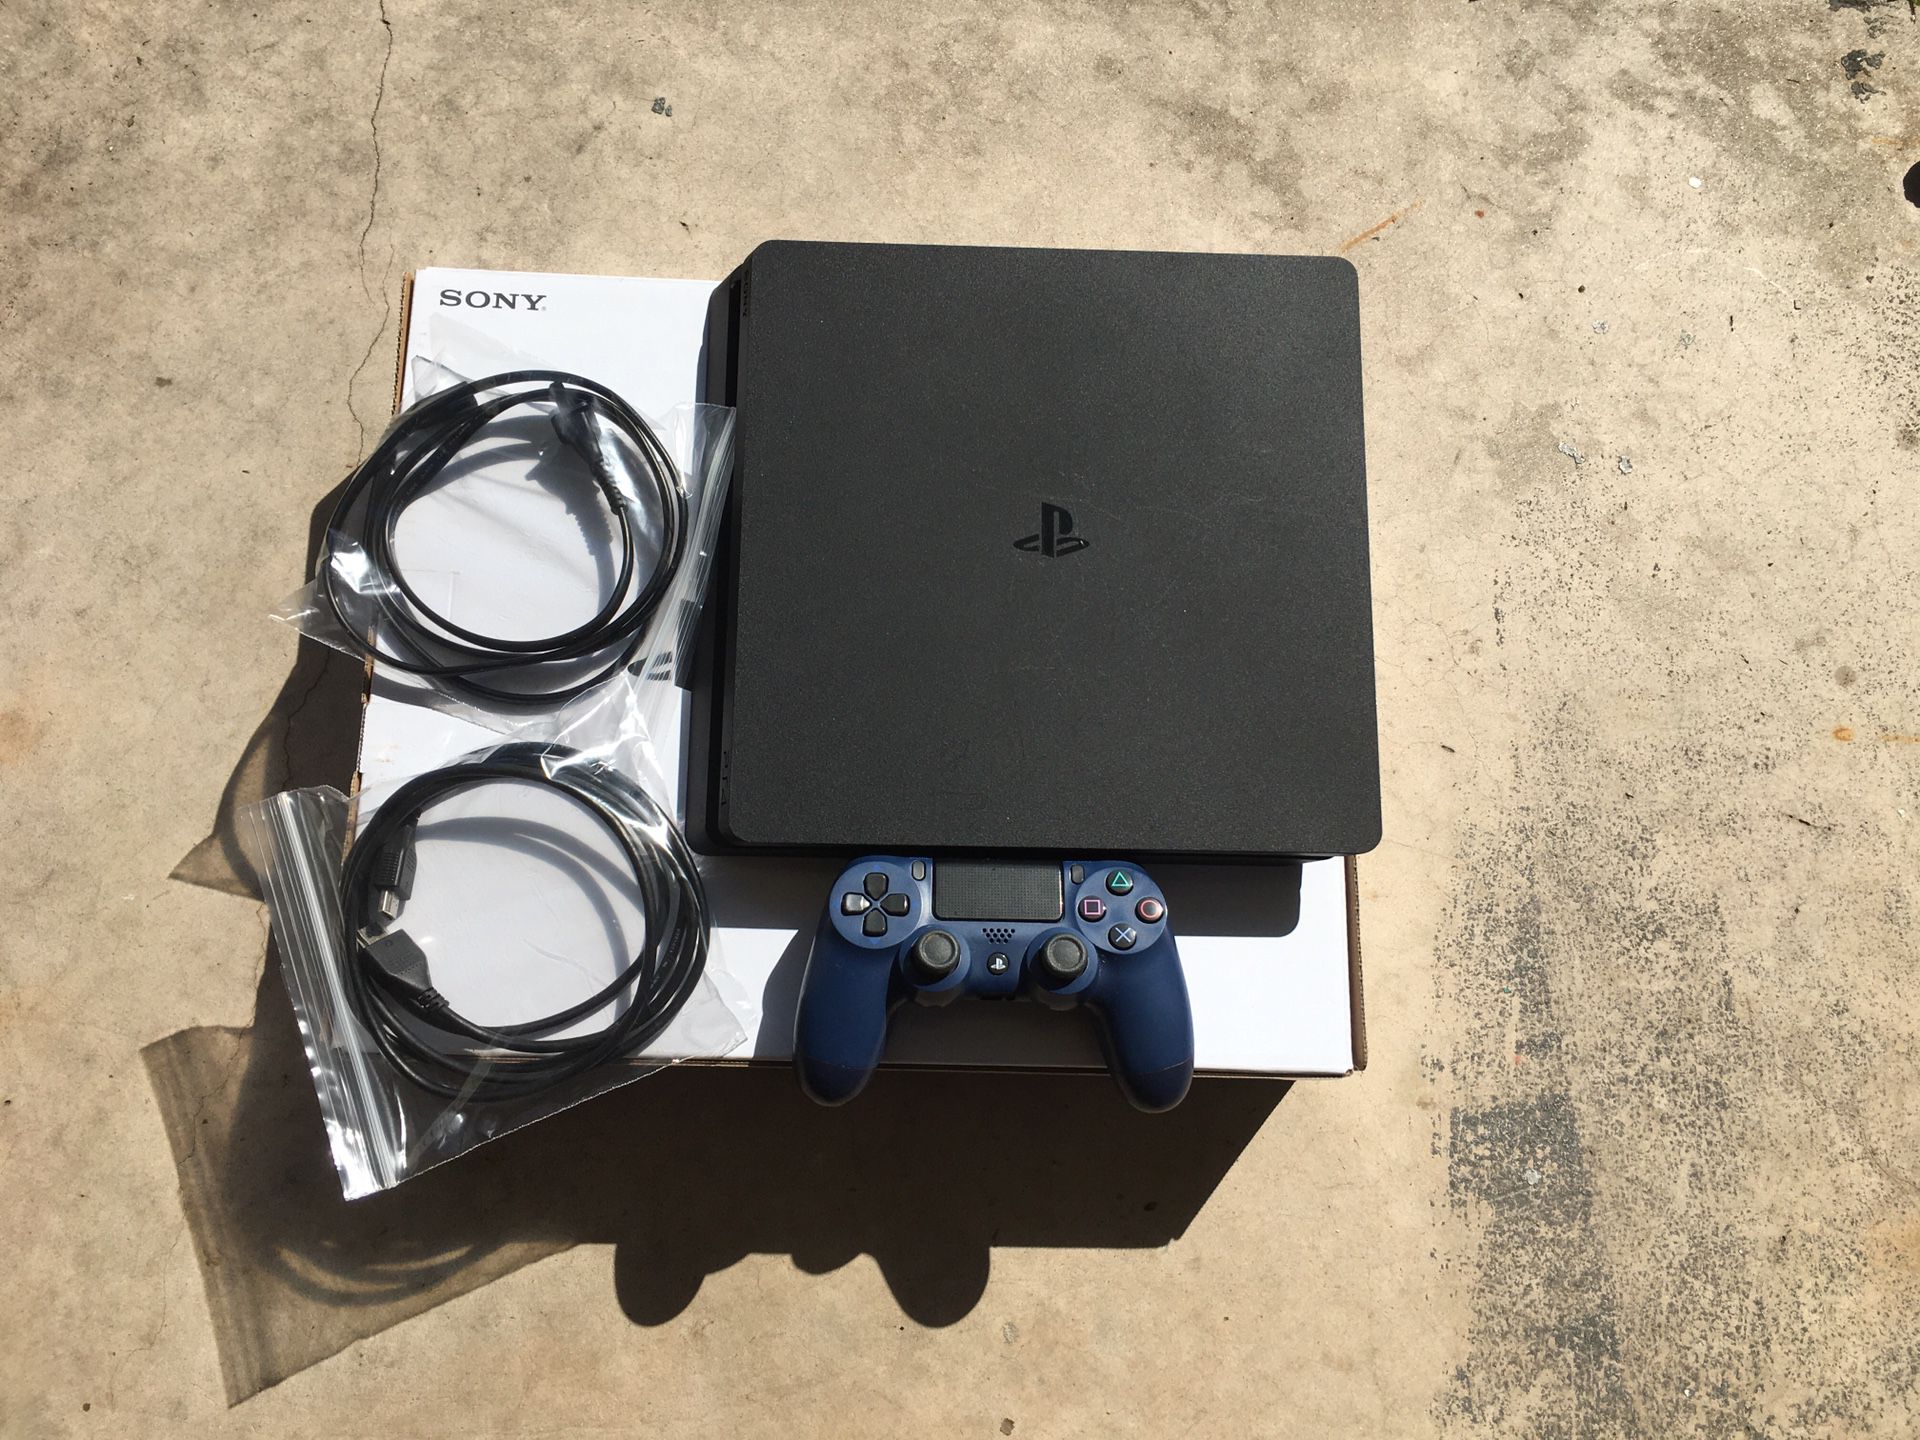 Ps4 slim 500gb with controller and box